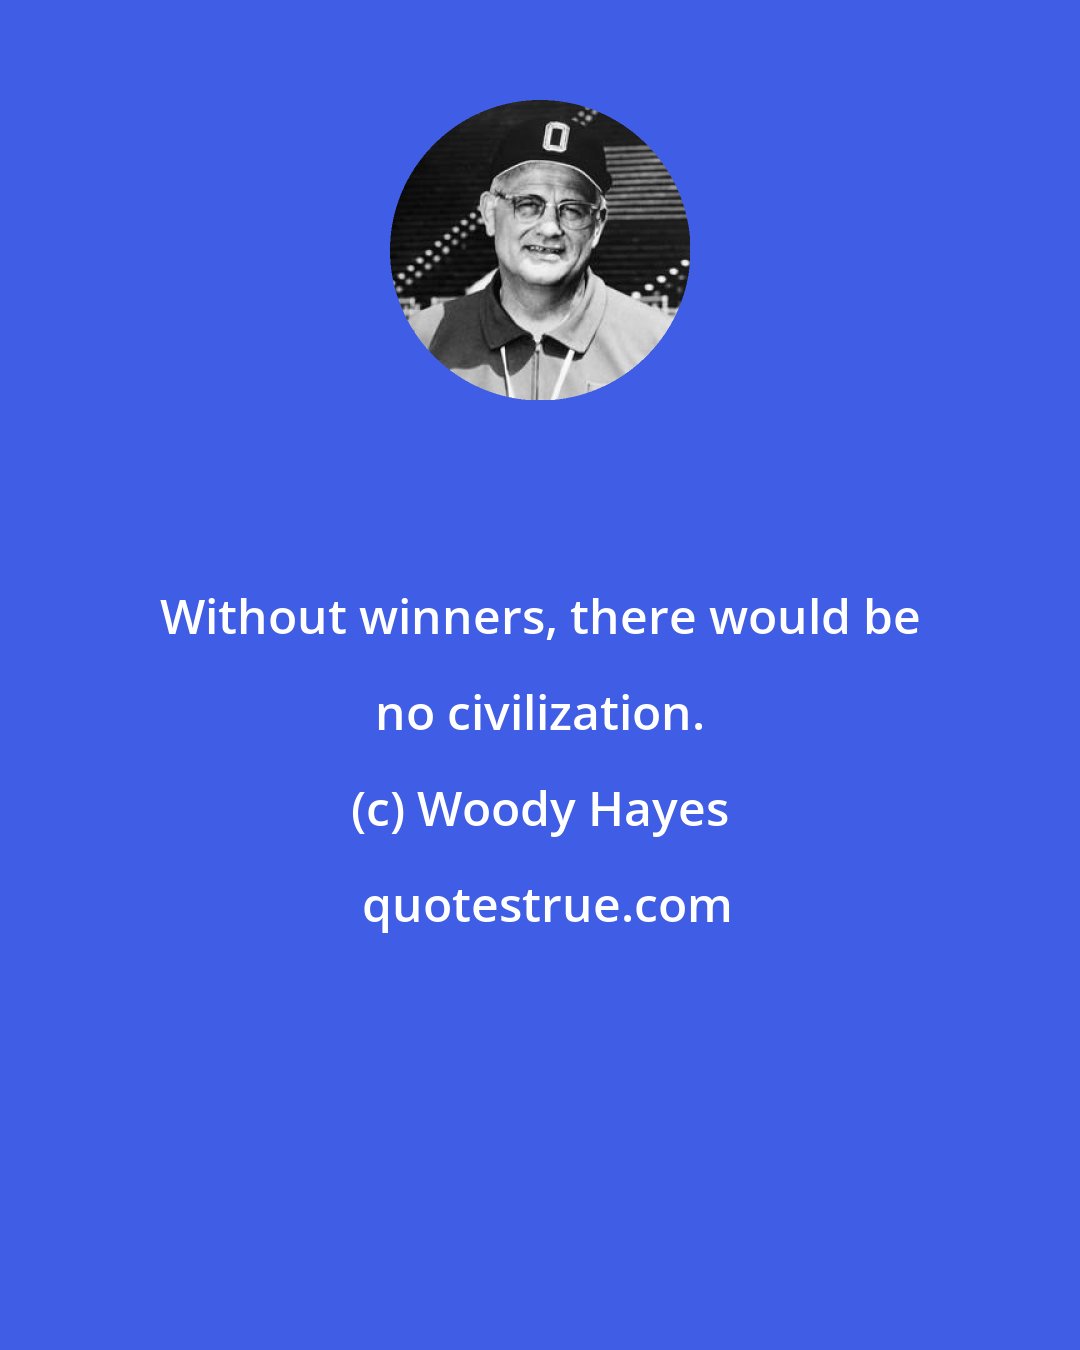 Woody Hayes: Without winners, there would be no civilization.